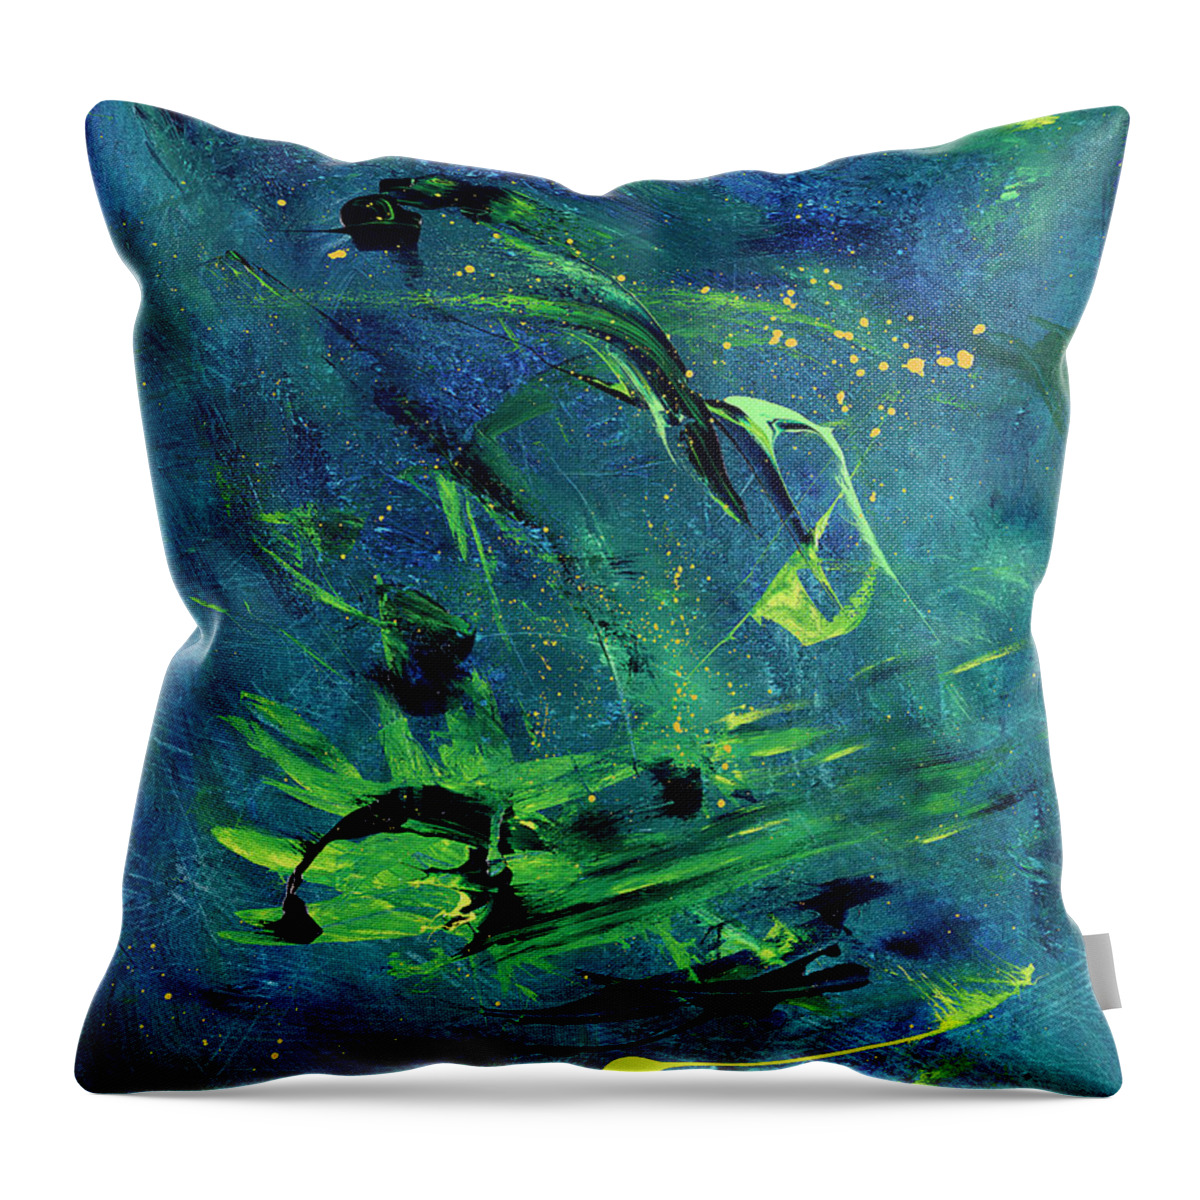 Primordial Throw Pillow featuring the painting Primordial Soup 270 by Joe Loffredo